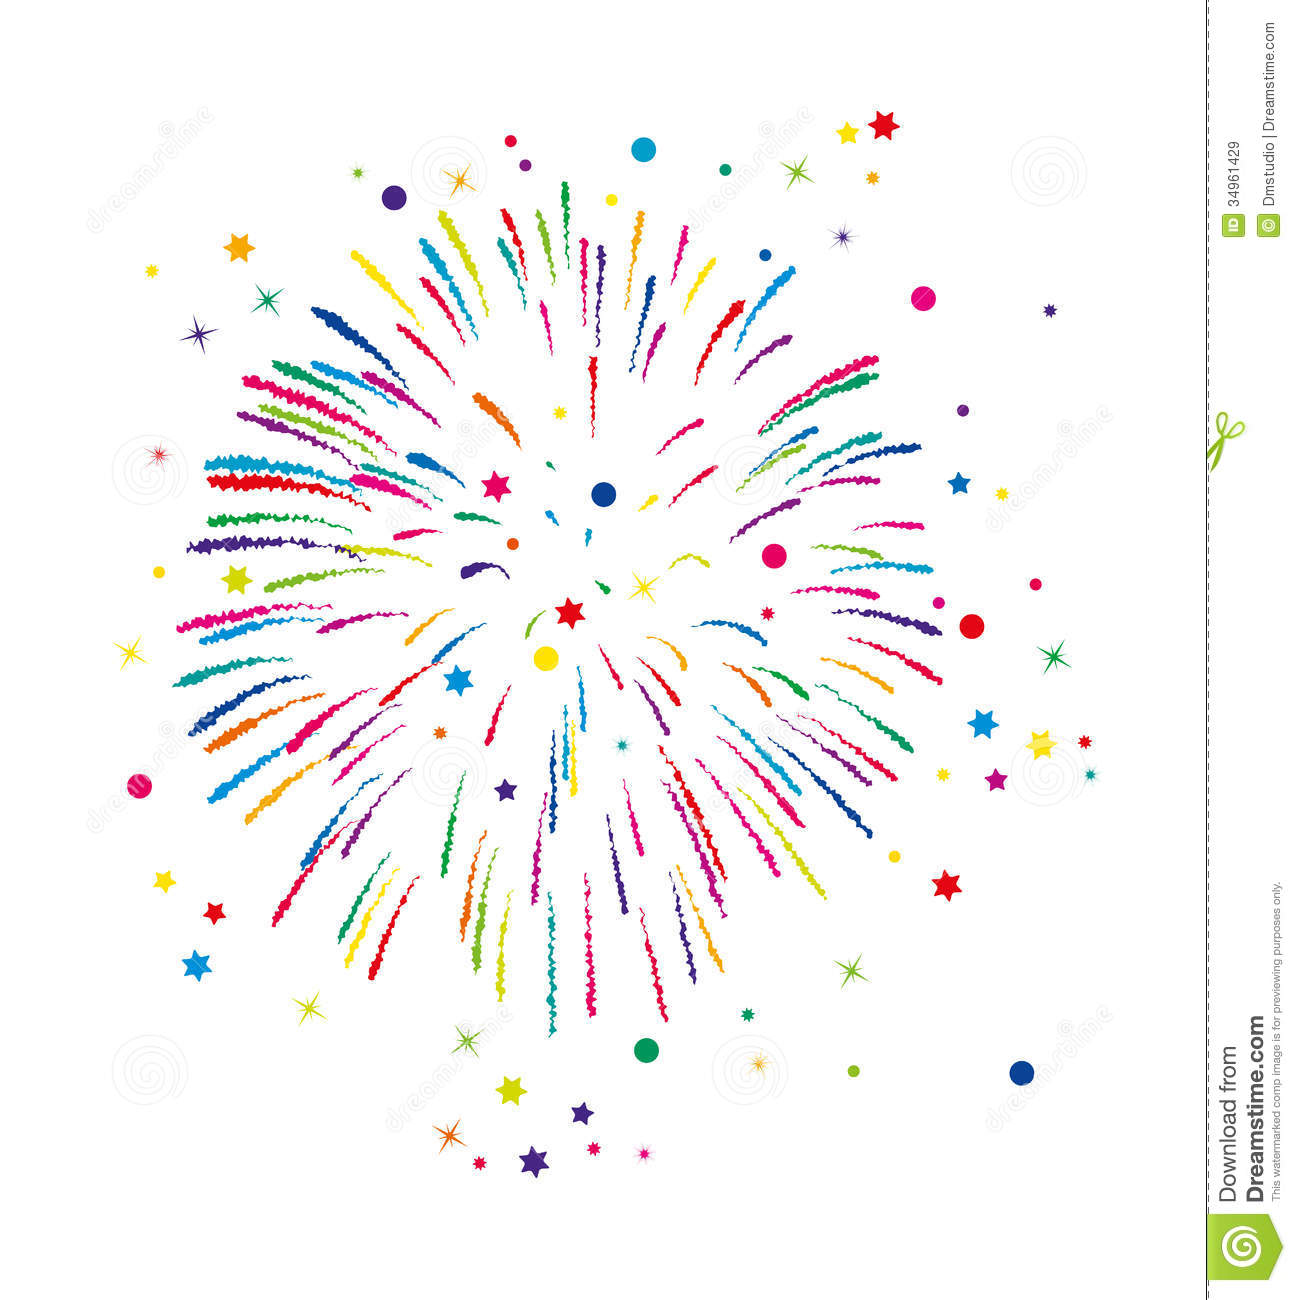 Vector Fireworks Background Royalty Free Stock Images   Image    